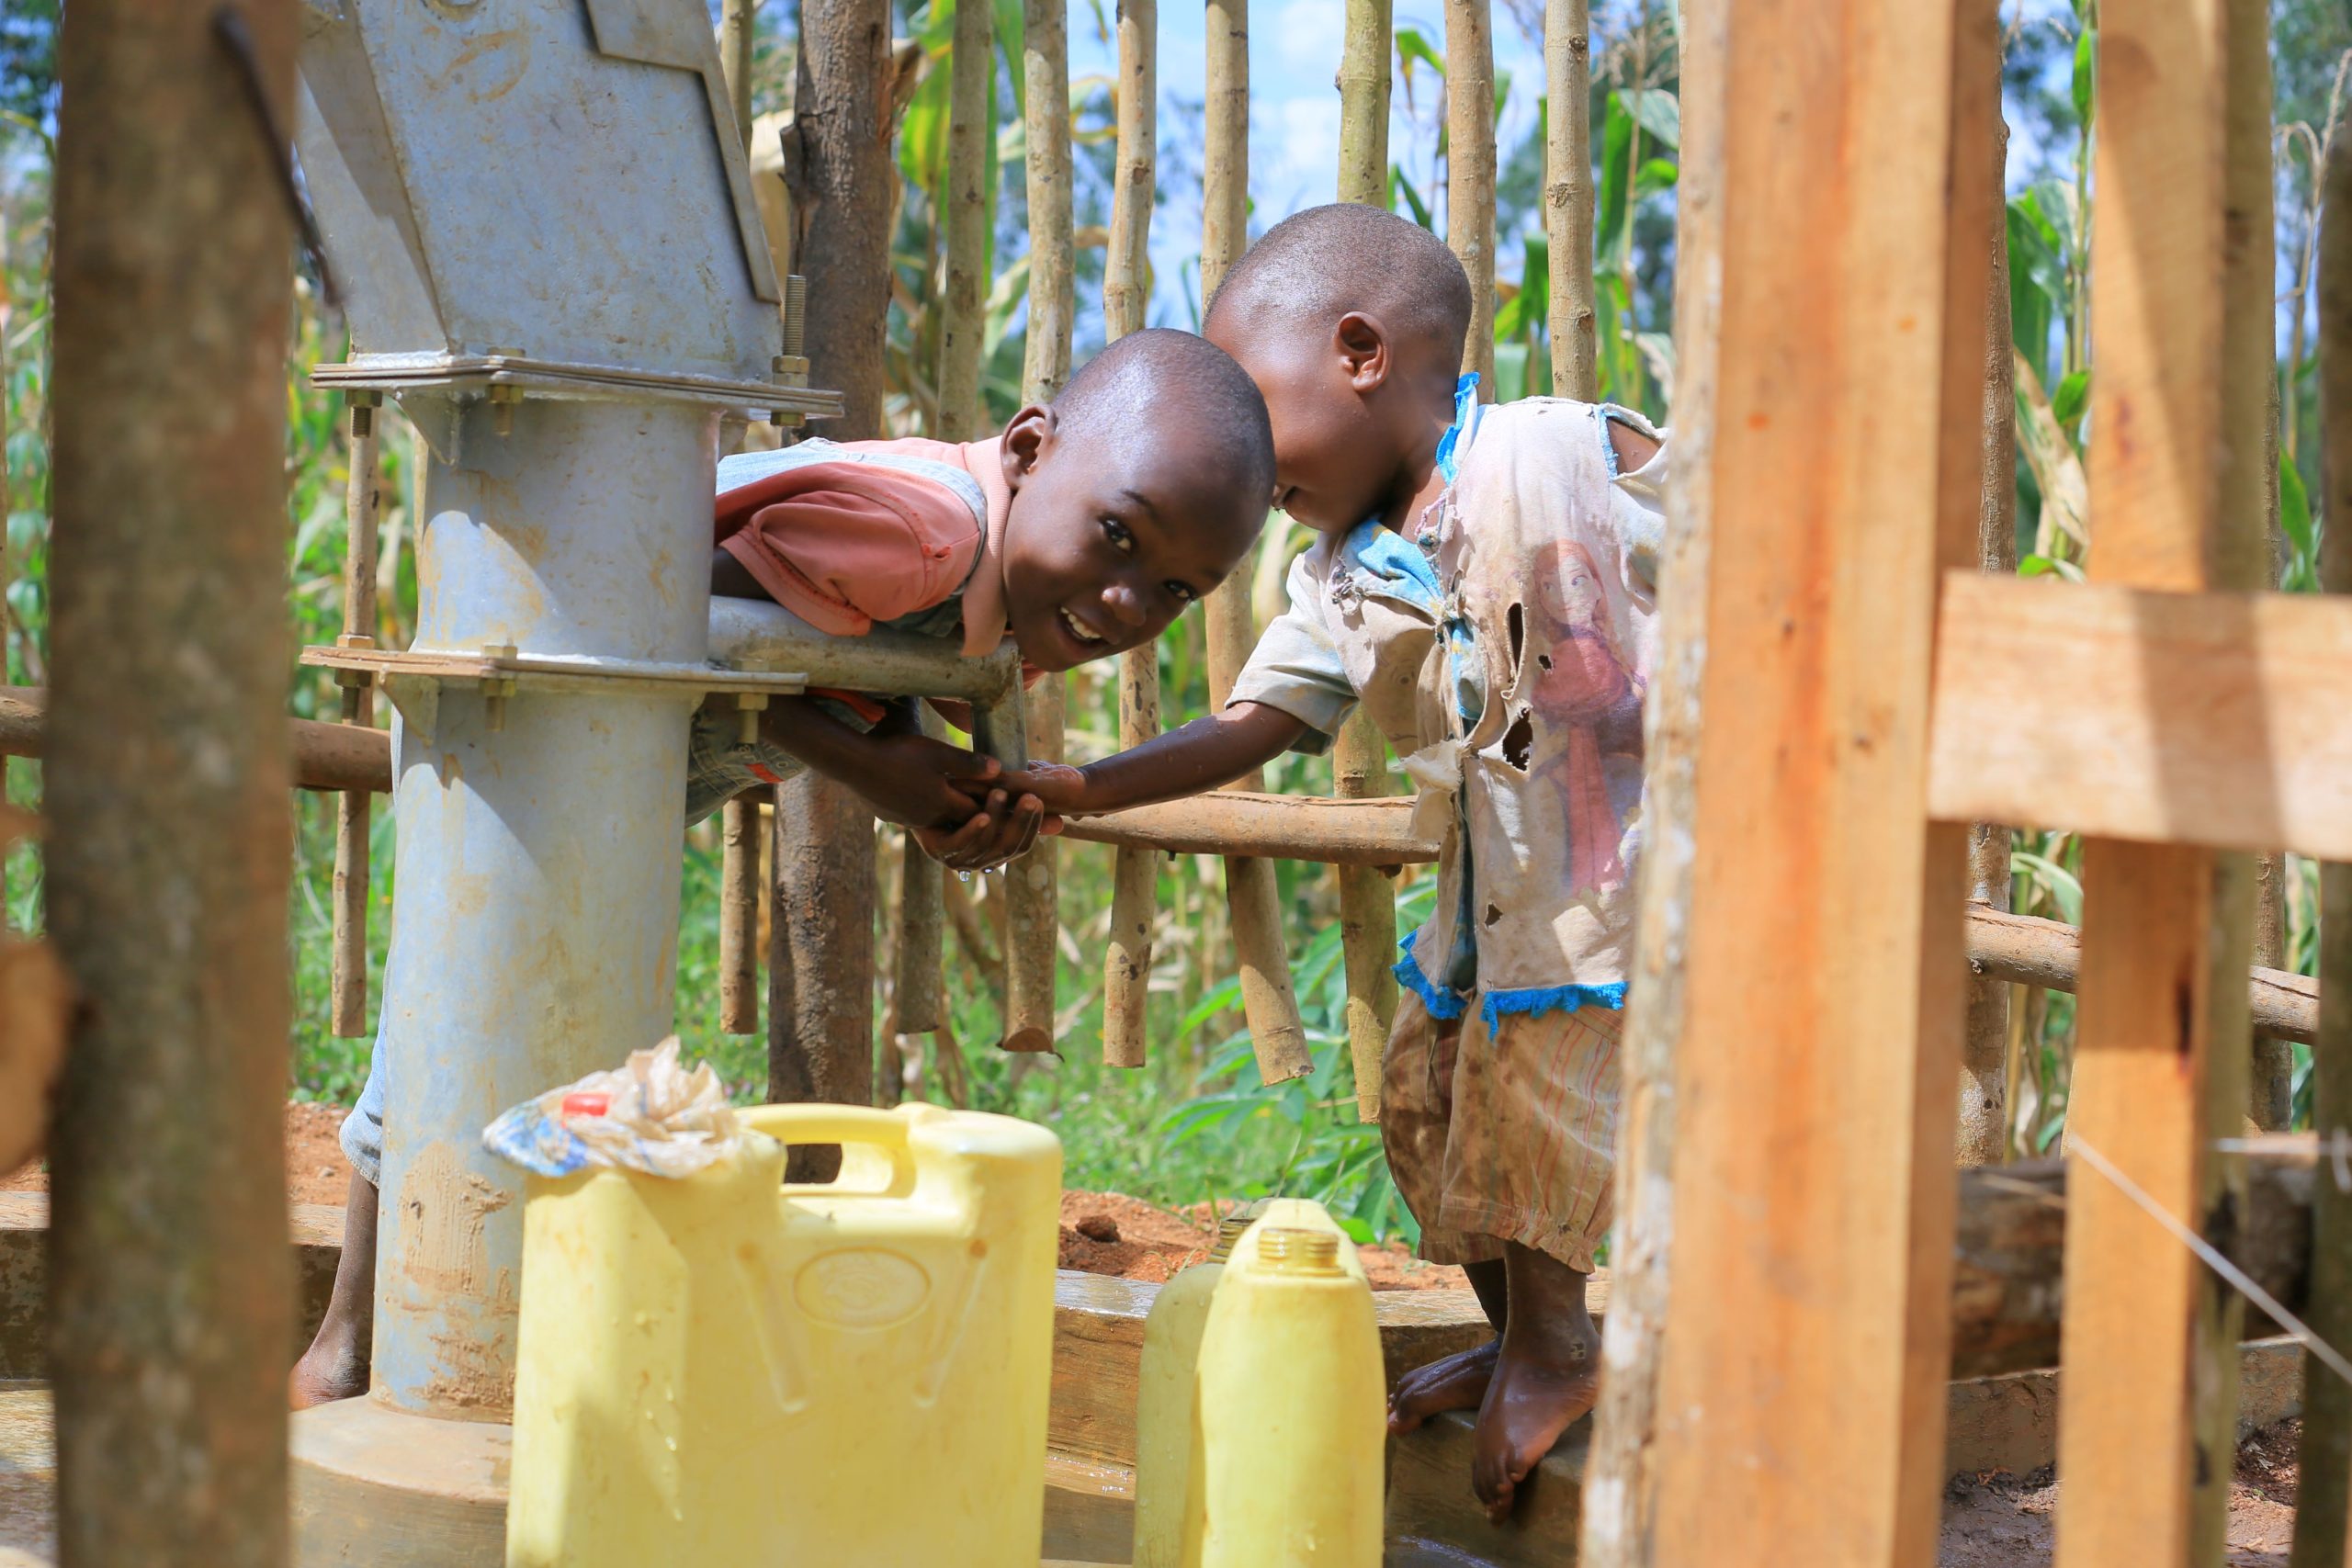 Assessment: Willingness to Pay (WTP) for Hand Pump-Related Products and Services